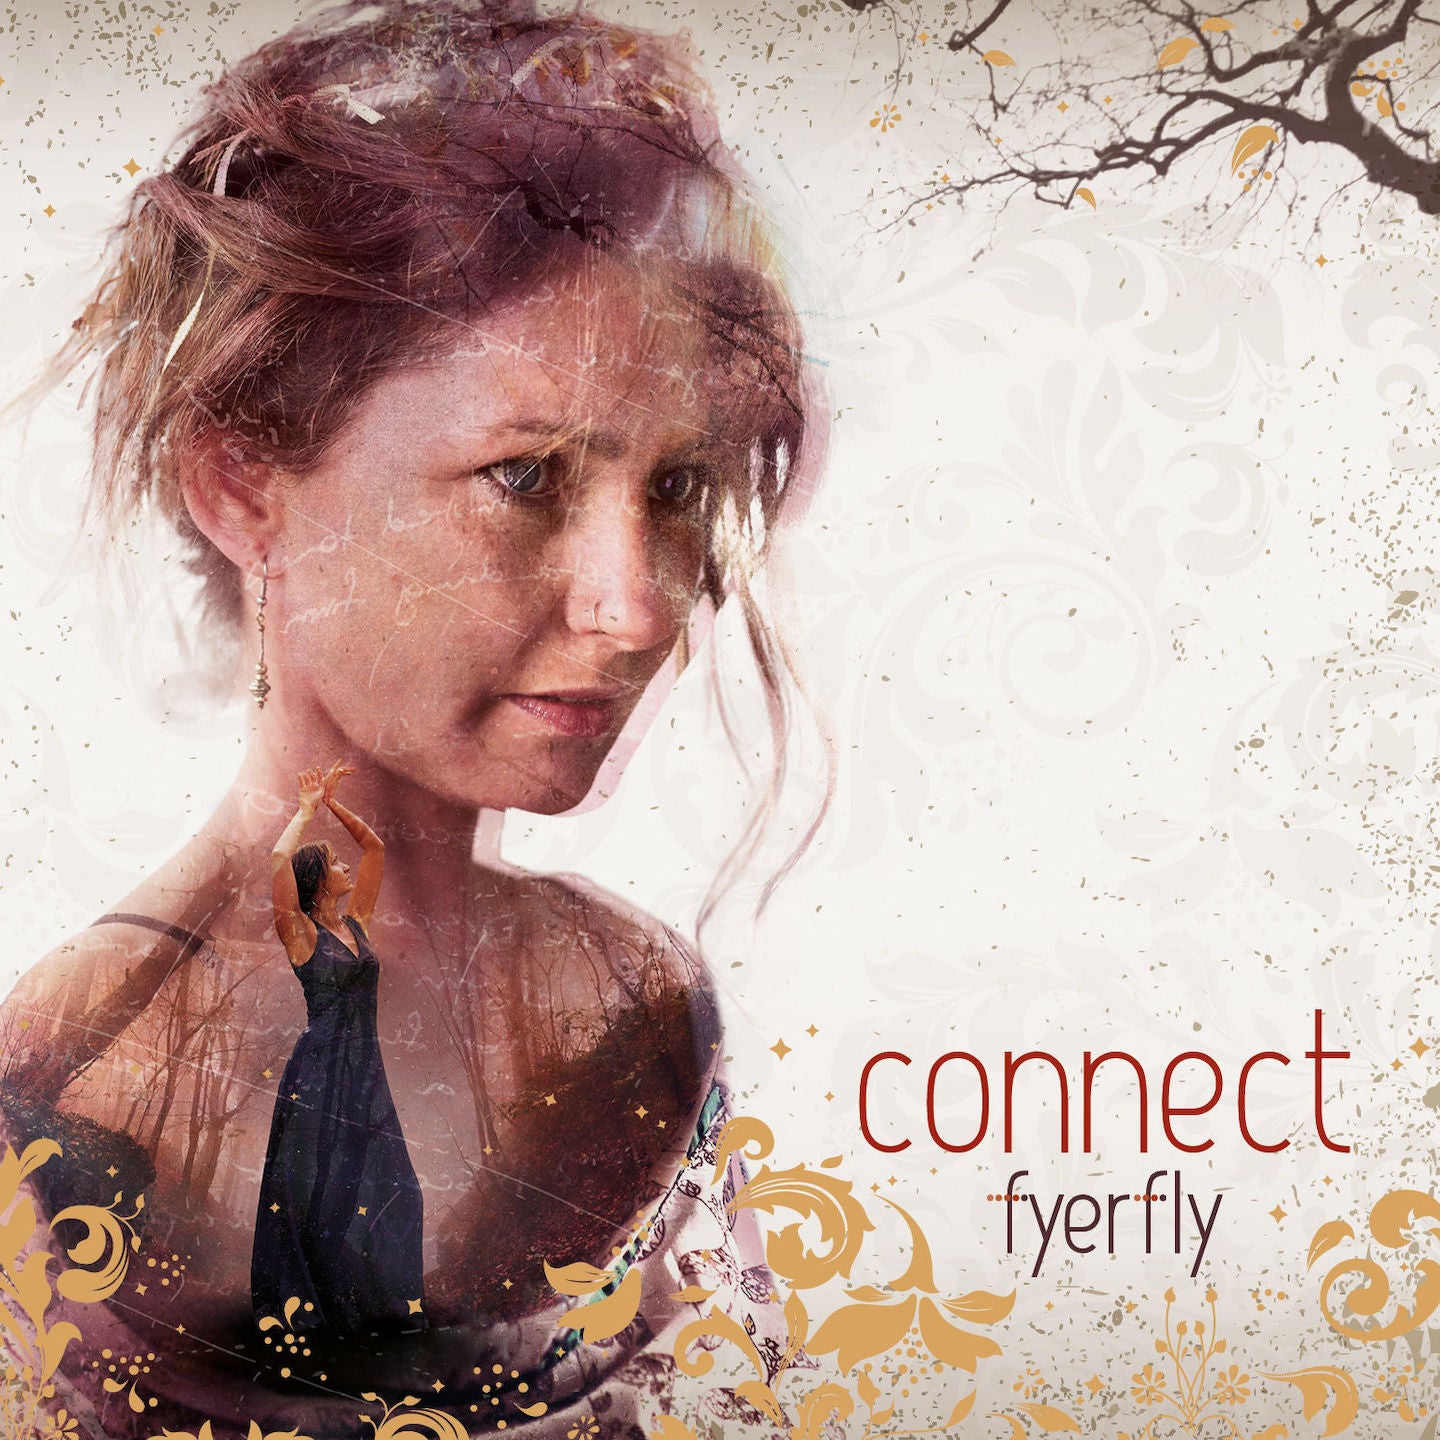 Desert Flower is from the album 'Connect' by Fyerfly. Infusing elements of Alt Rock, Sadcore, Jazz and Blues, this deeply intimate and sultry album will soothe you as your soul is immersed in its serene and haunting sounds. A story of a woman finding a self-isolated soul locked away in the desert. Of planting and nurturing a garden - creating a safe and loving space for him to be free. Rocking electric guitar with solo, vocal harmonies and catchy chorus.